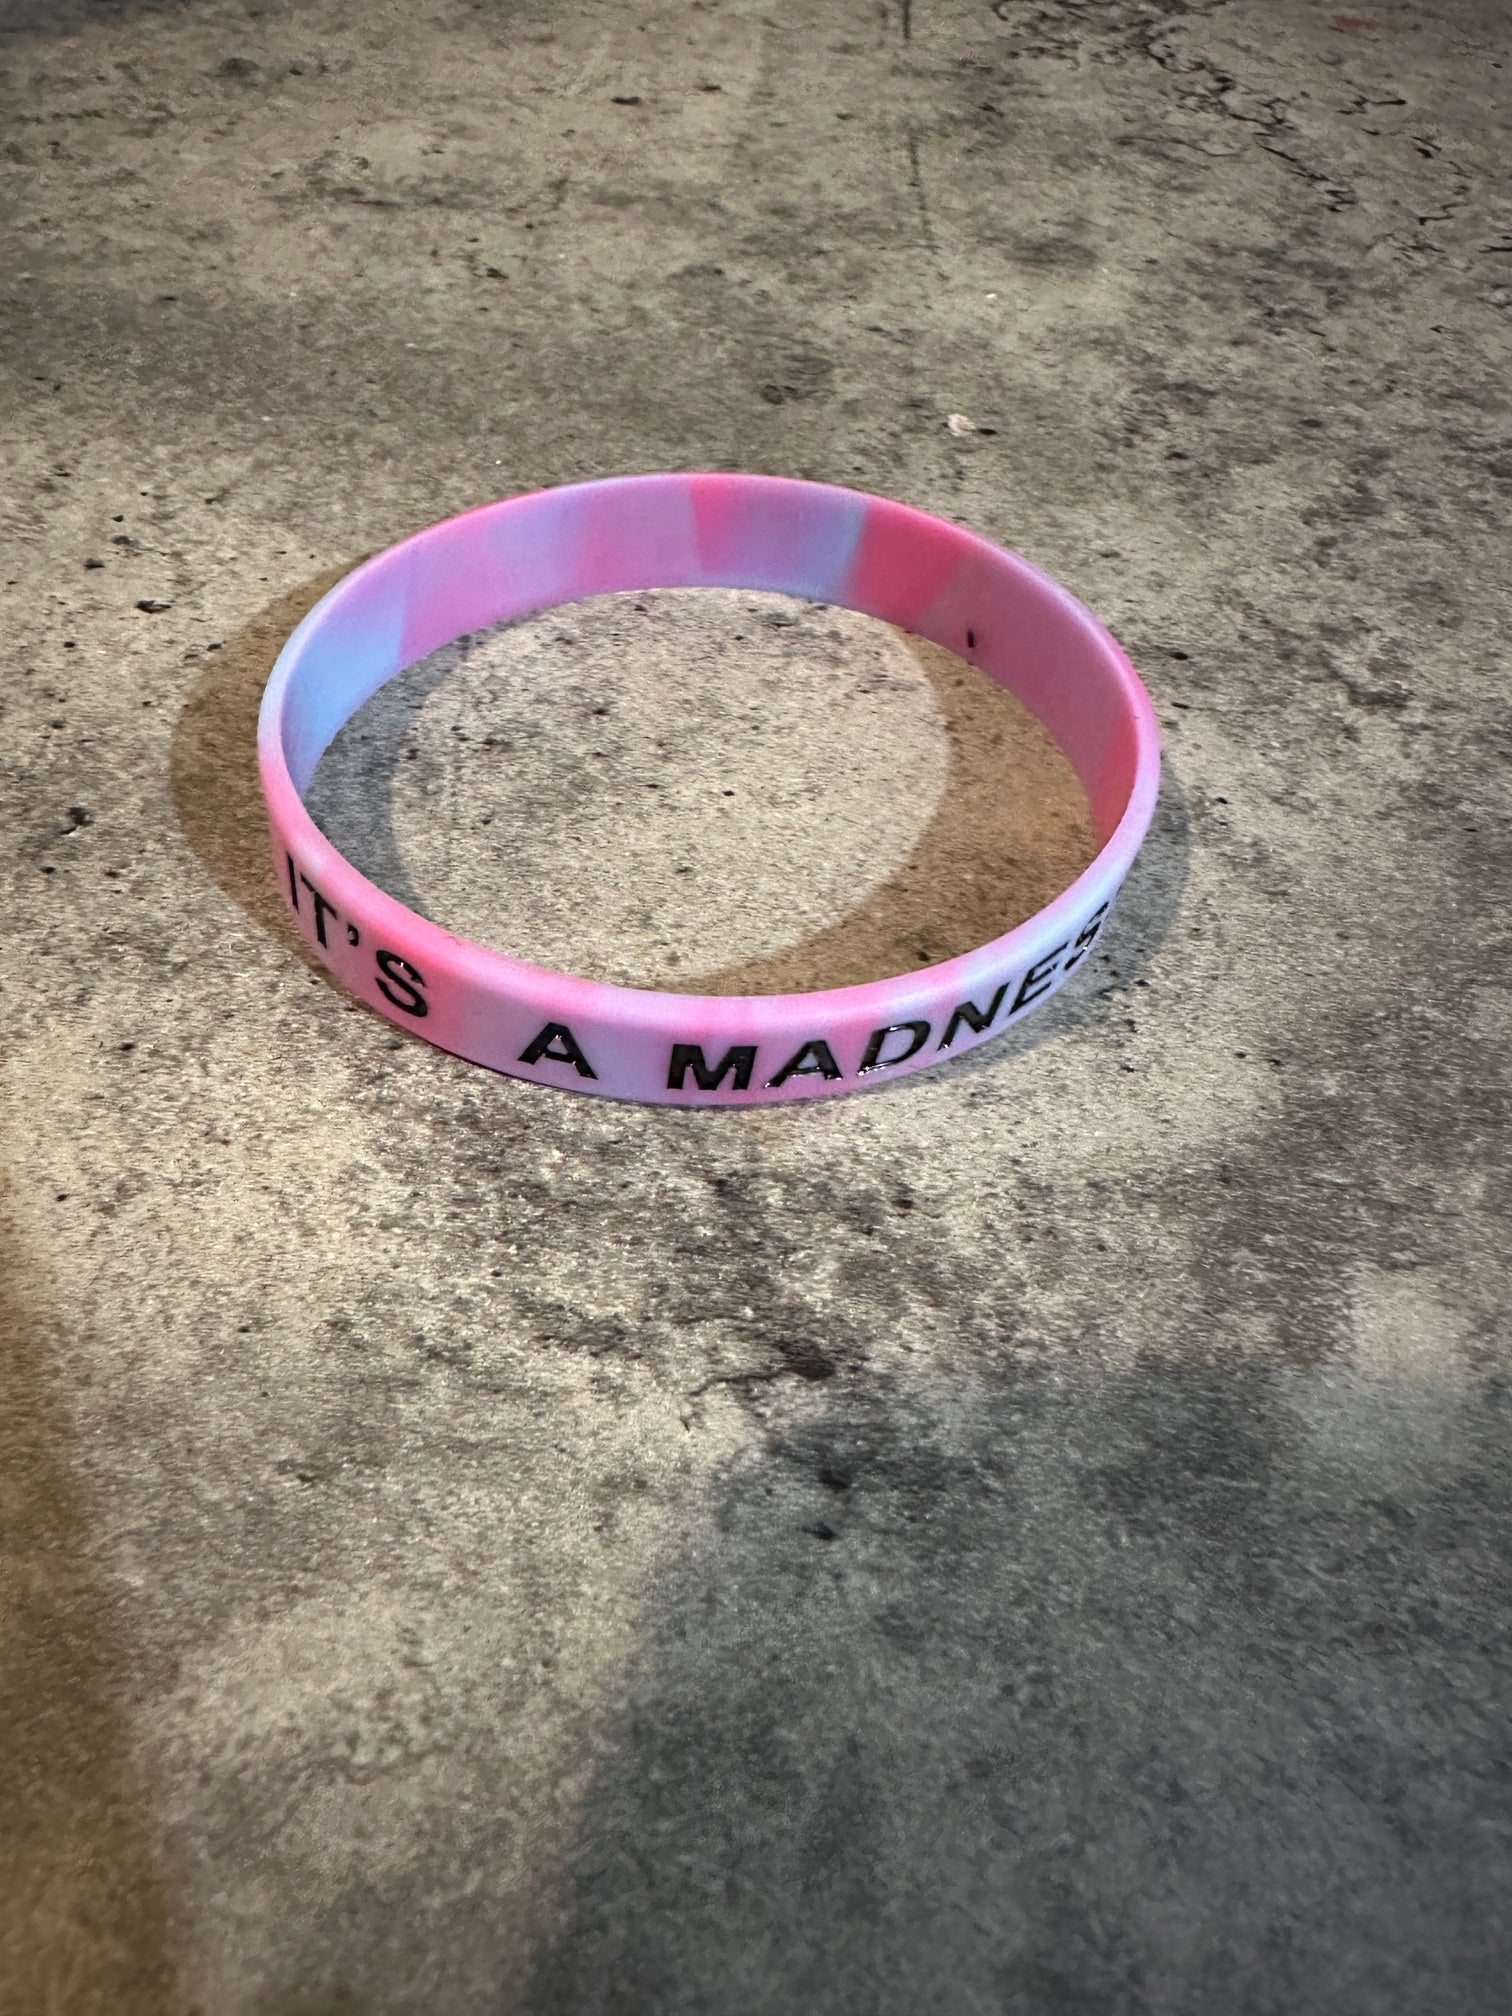 It's a madness WRISTBANDS